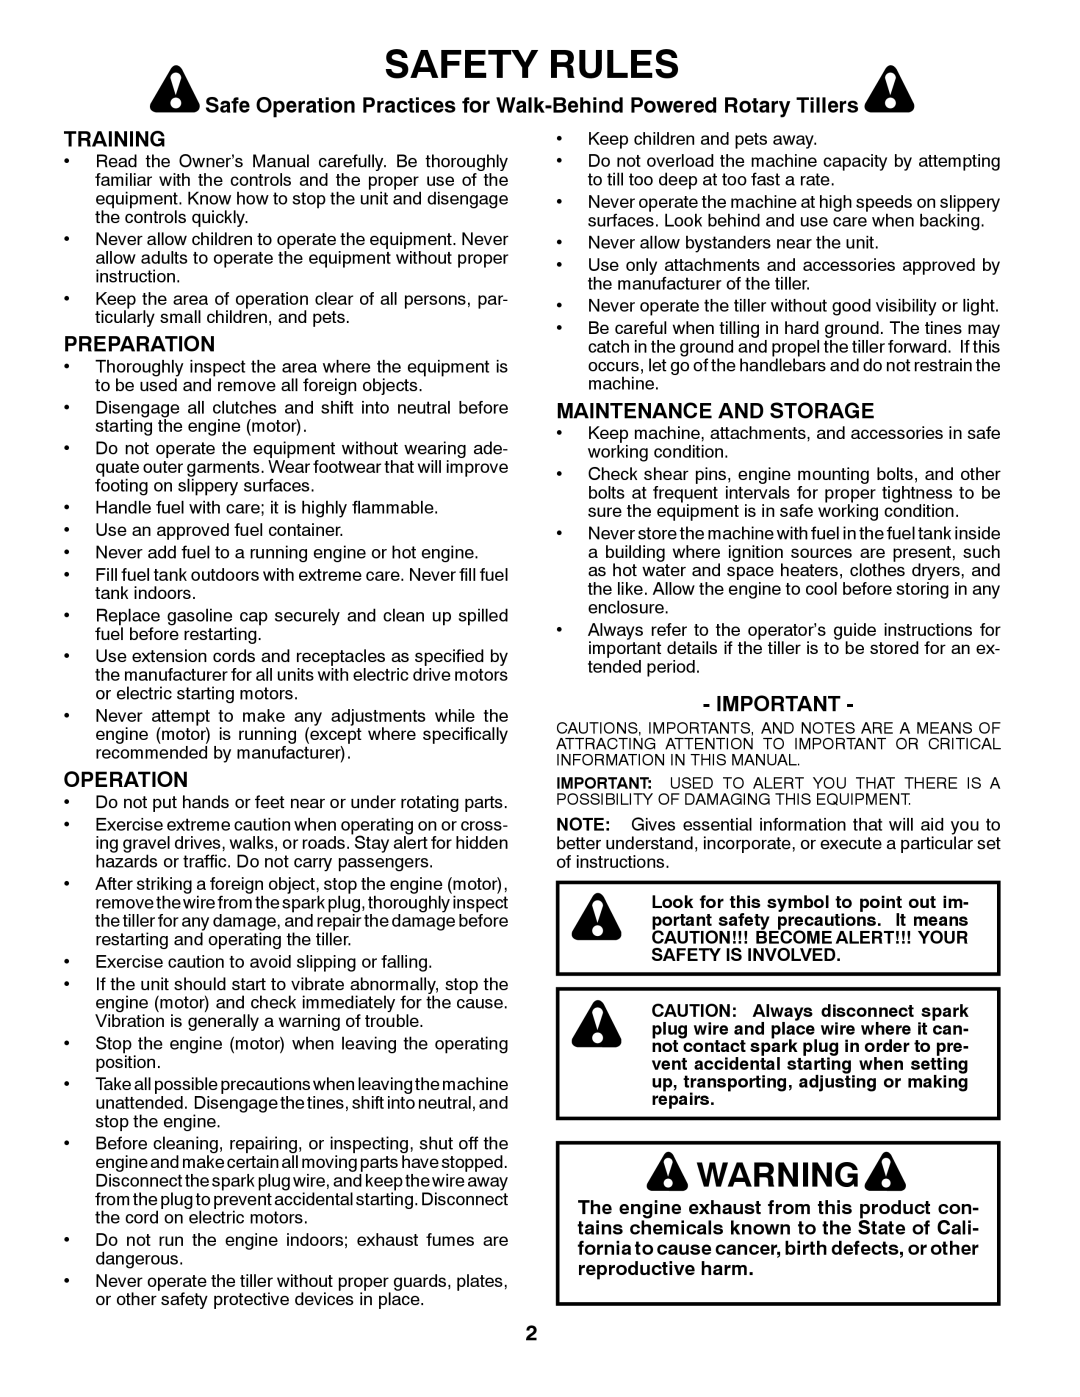 Poulan 427896 manual Safety Rules, Safe Operation Practices for Walk-Behind Powered Rotary Tillers, Training, Preparation 